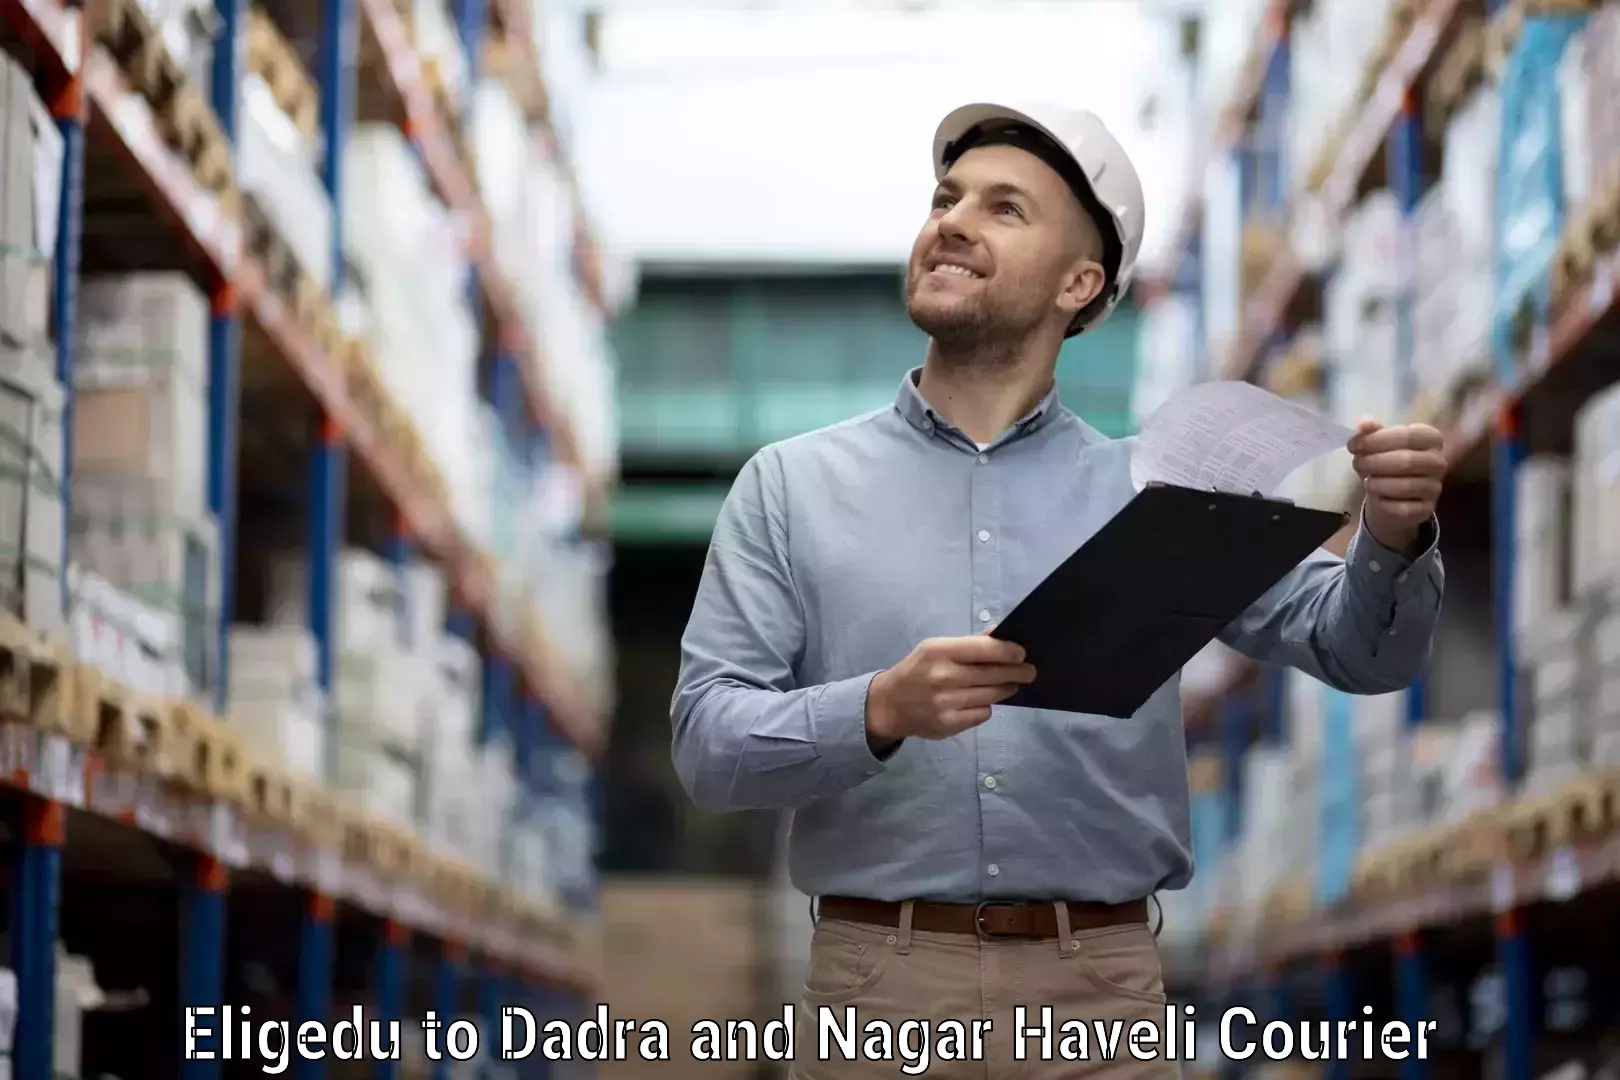 Special handling courier Eligedu to Dadra and Nagar Haveli